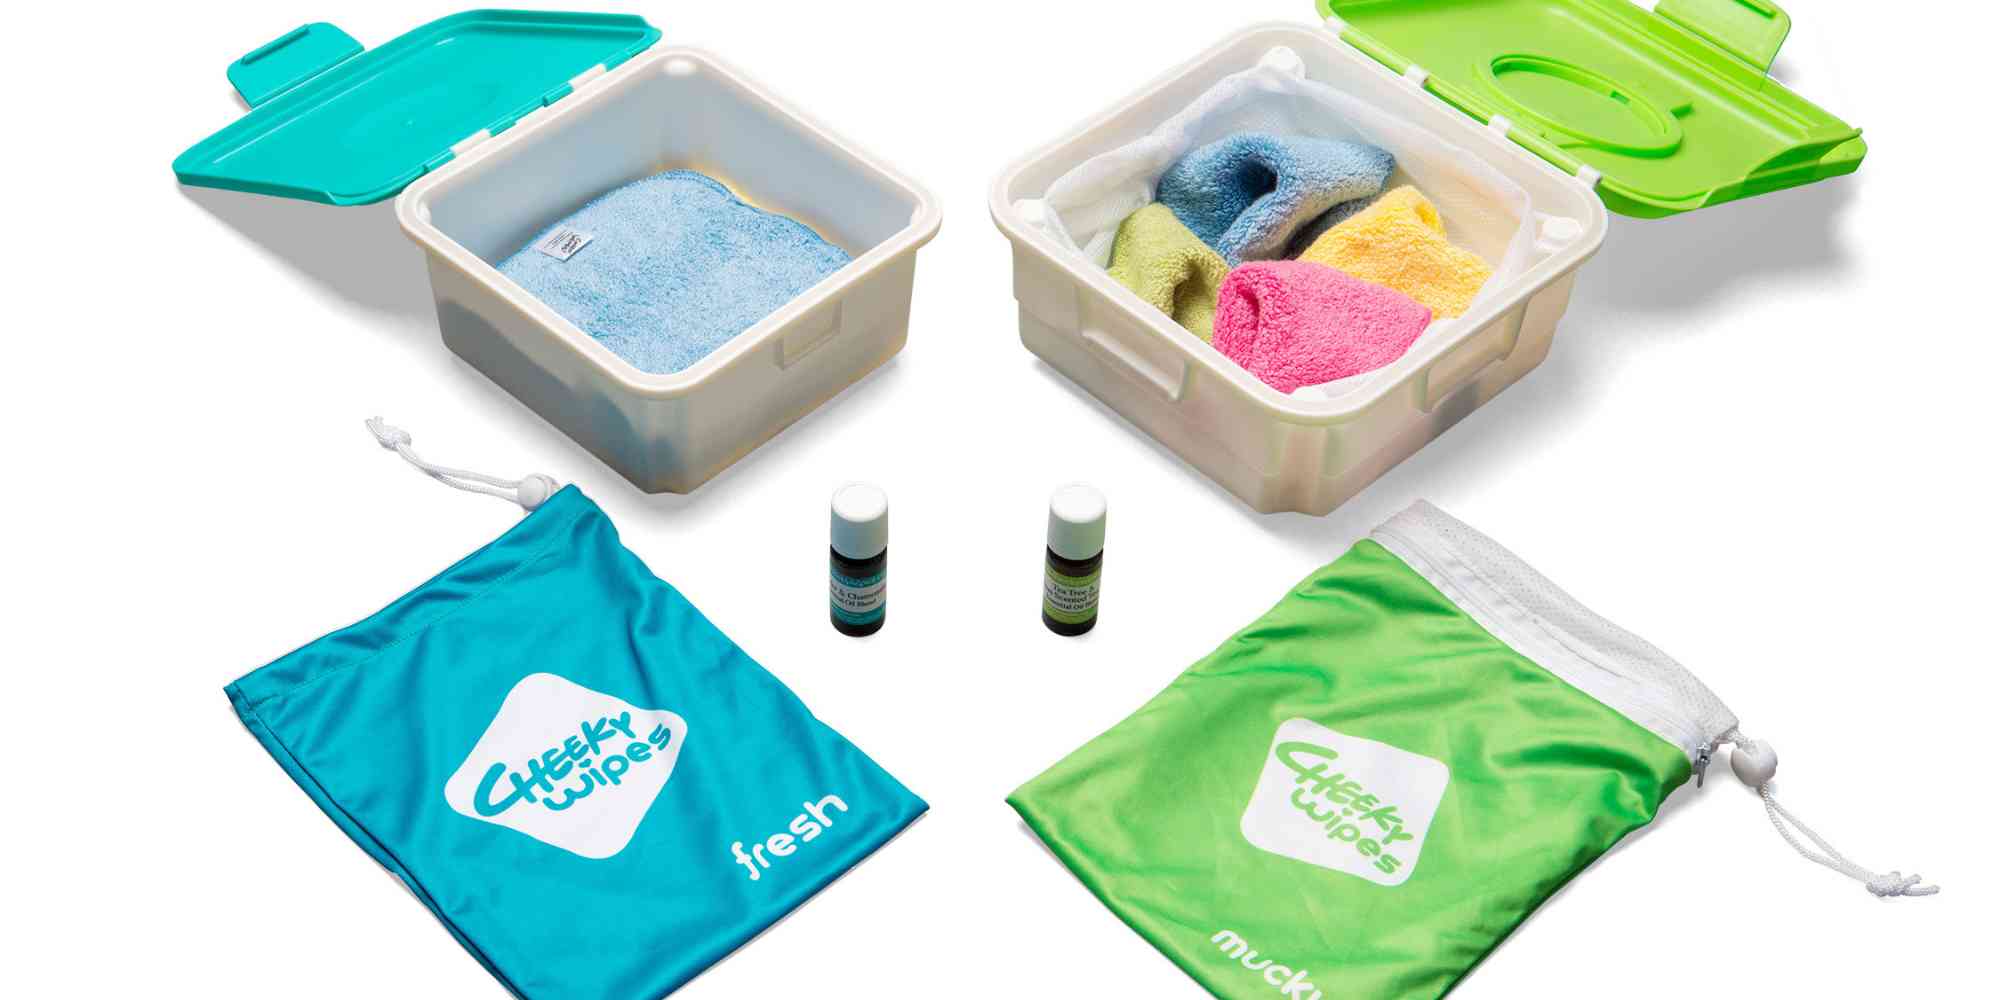 Cheeky Wipes cotton all-in-one kit - Bonbon Conceptstore